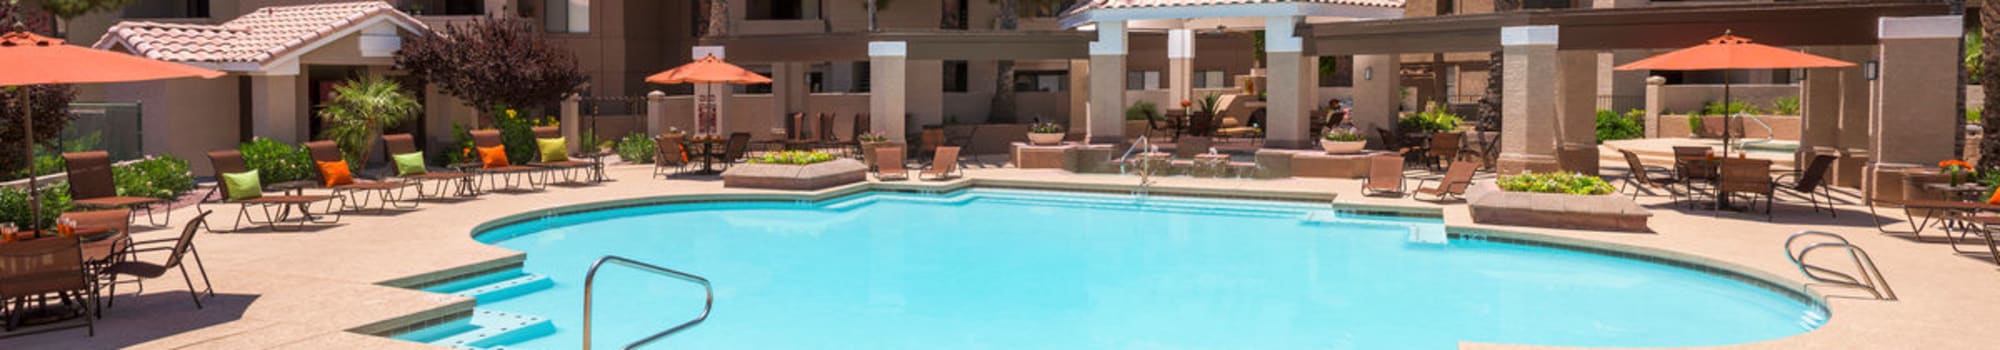 Amenities at The Palisades in Paradise Valley in Phoenix, Arizona